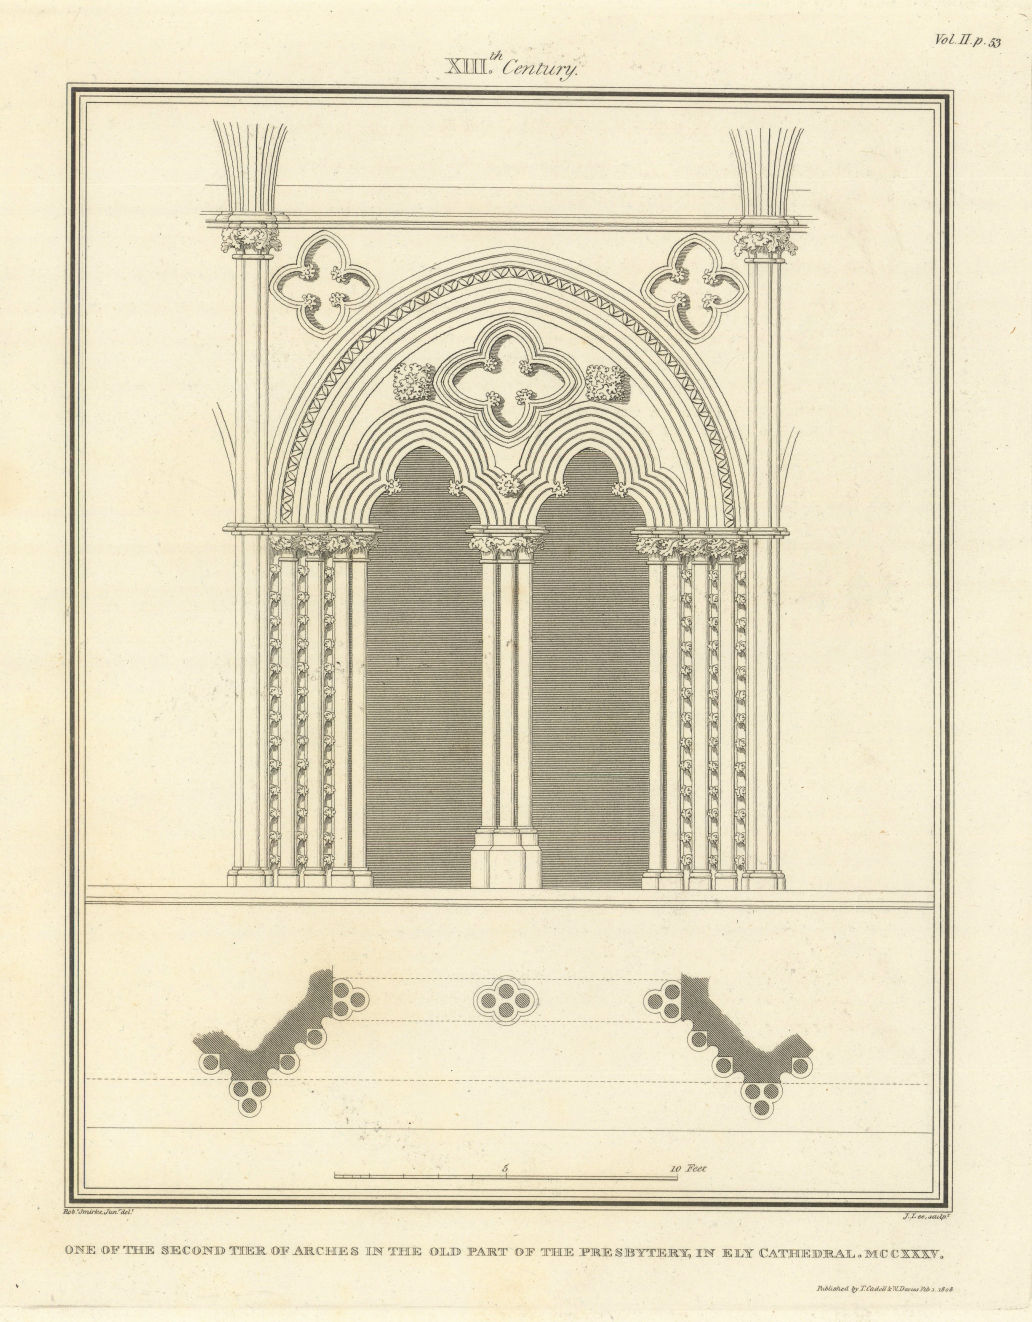 One of the second tier of arches in the Presbytery in Ely Cathedral. SMIRKE 1810